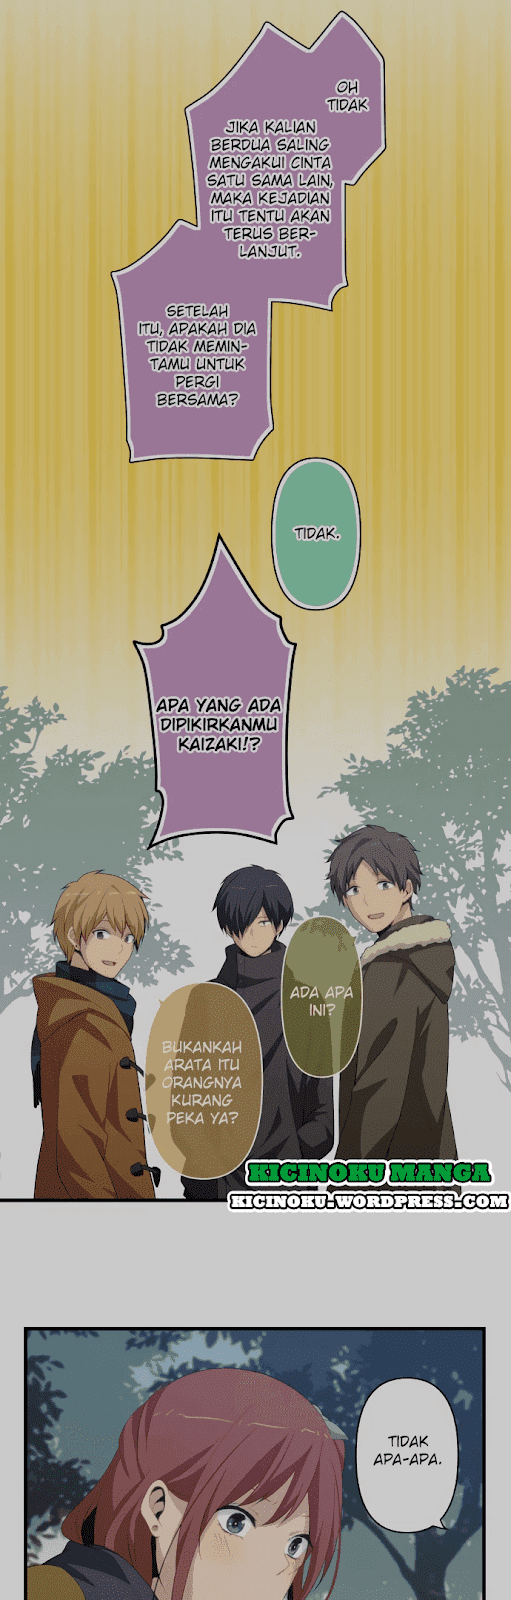 ReLIFE Chapter 201